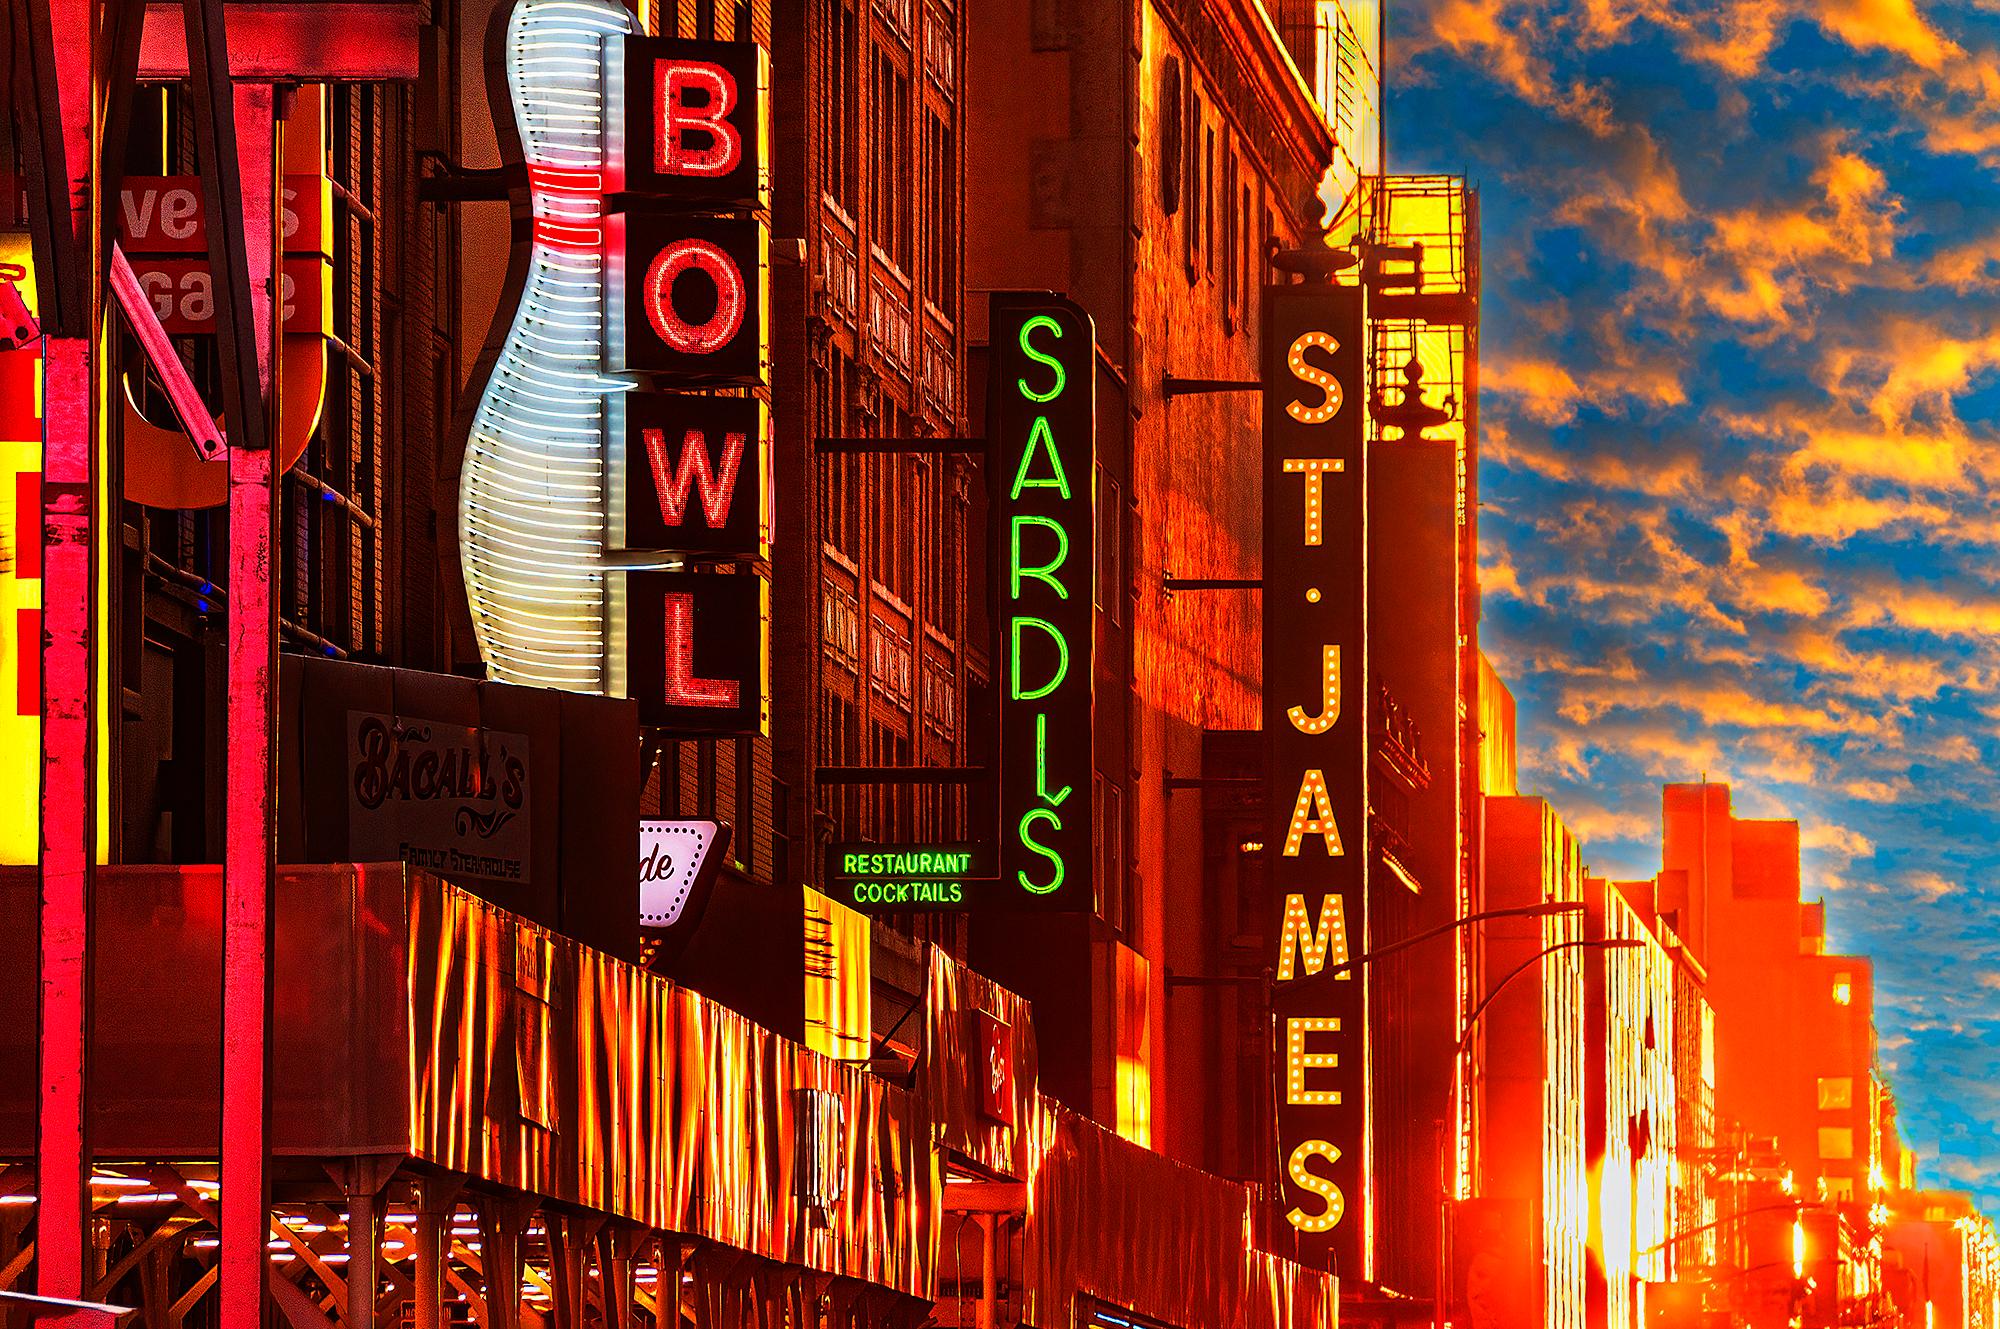 Mitchell Funk Landscape Photograph - Neon Signs Broadway Theater District in Dramatic Light